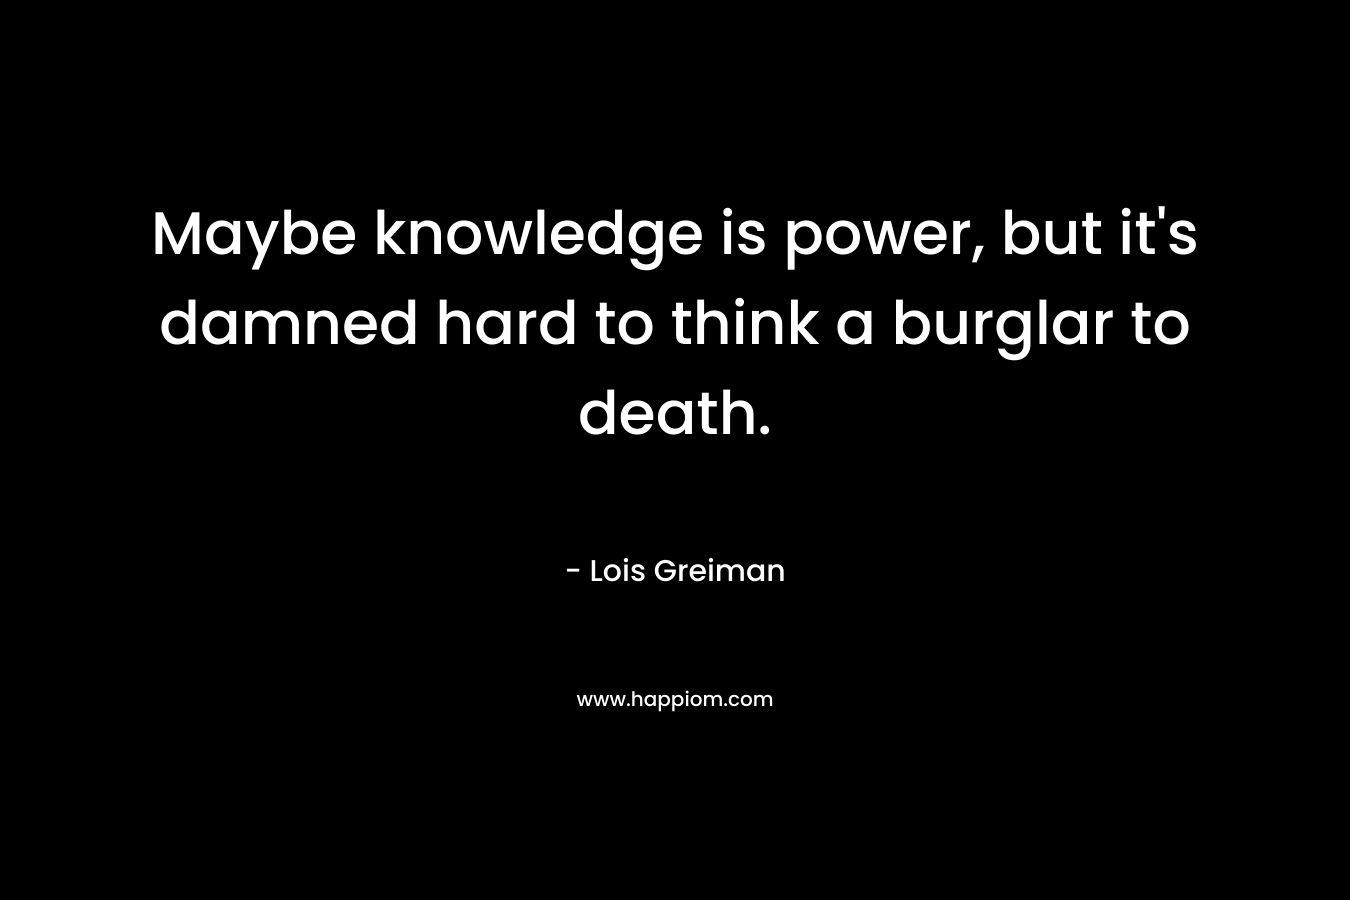 Maybe knowledge is power, but it's damned hard to think a burglar to death.